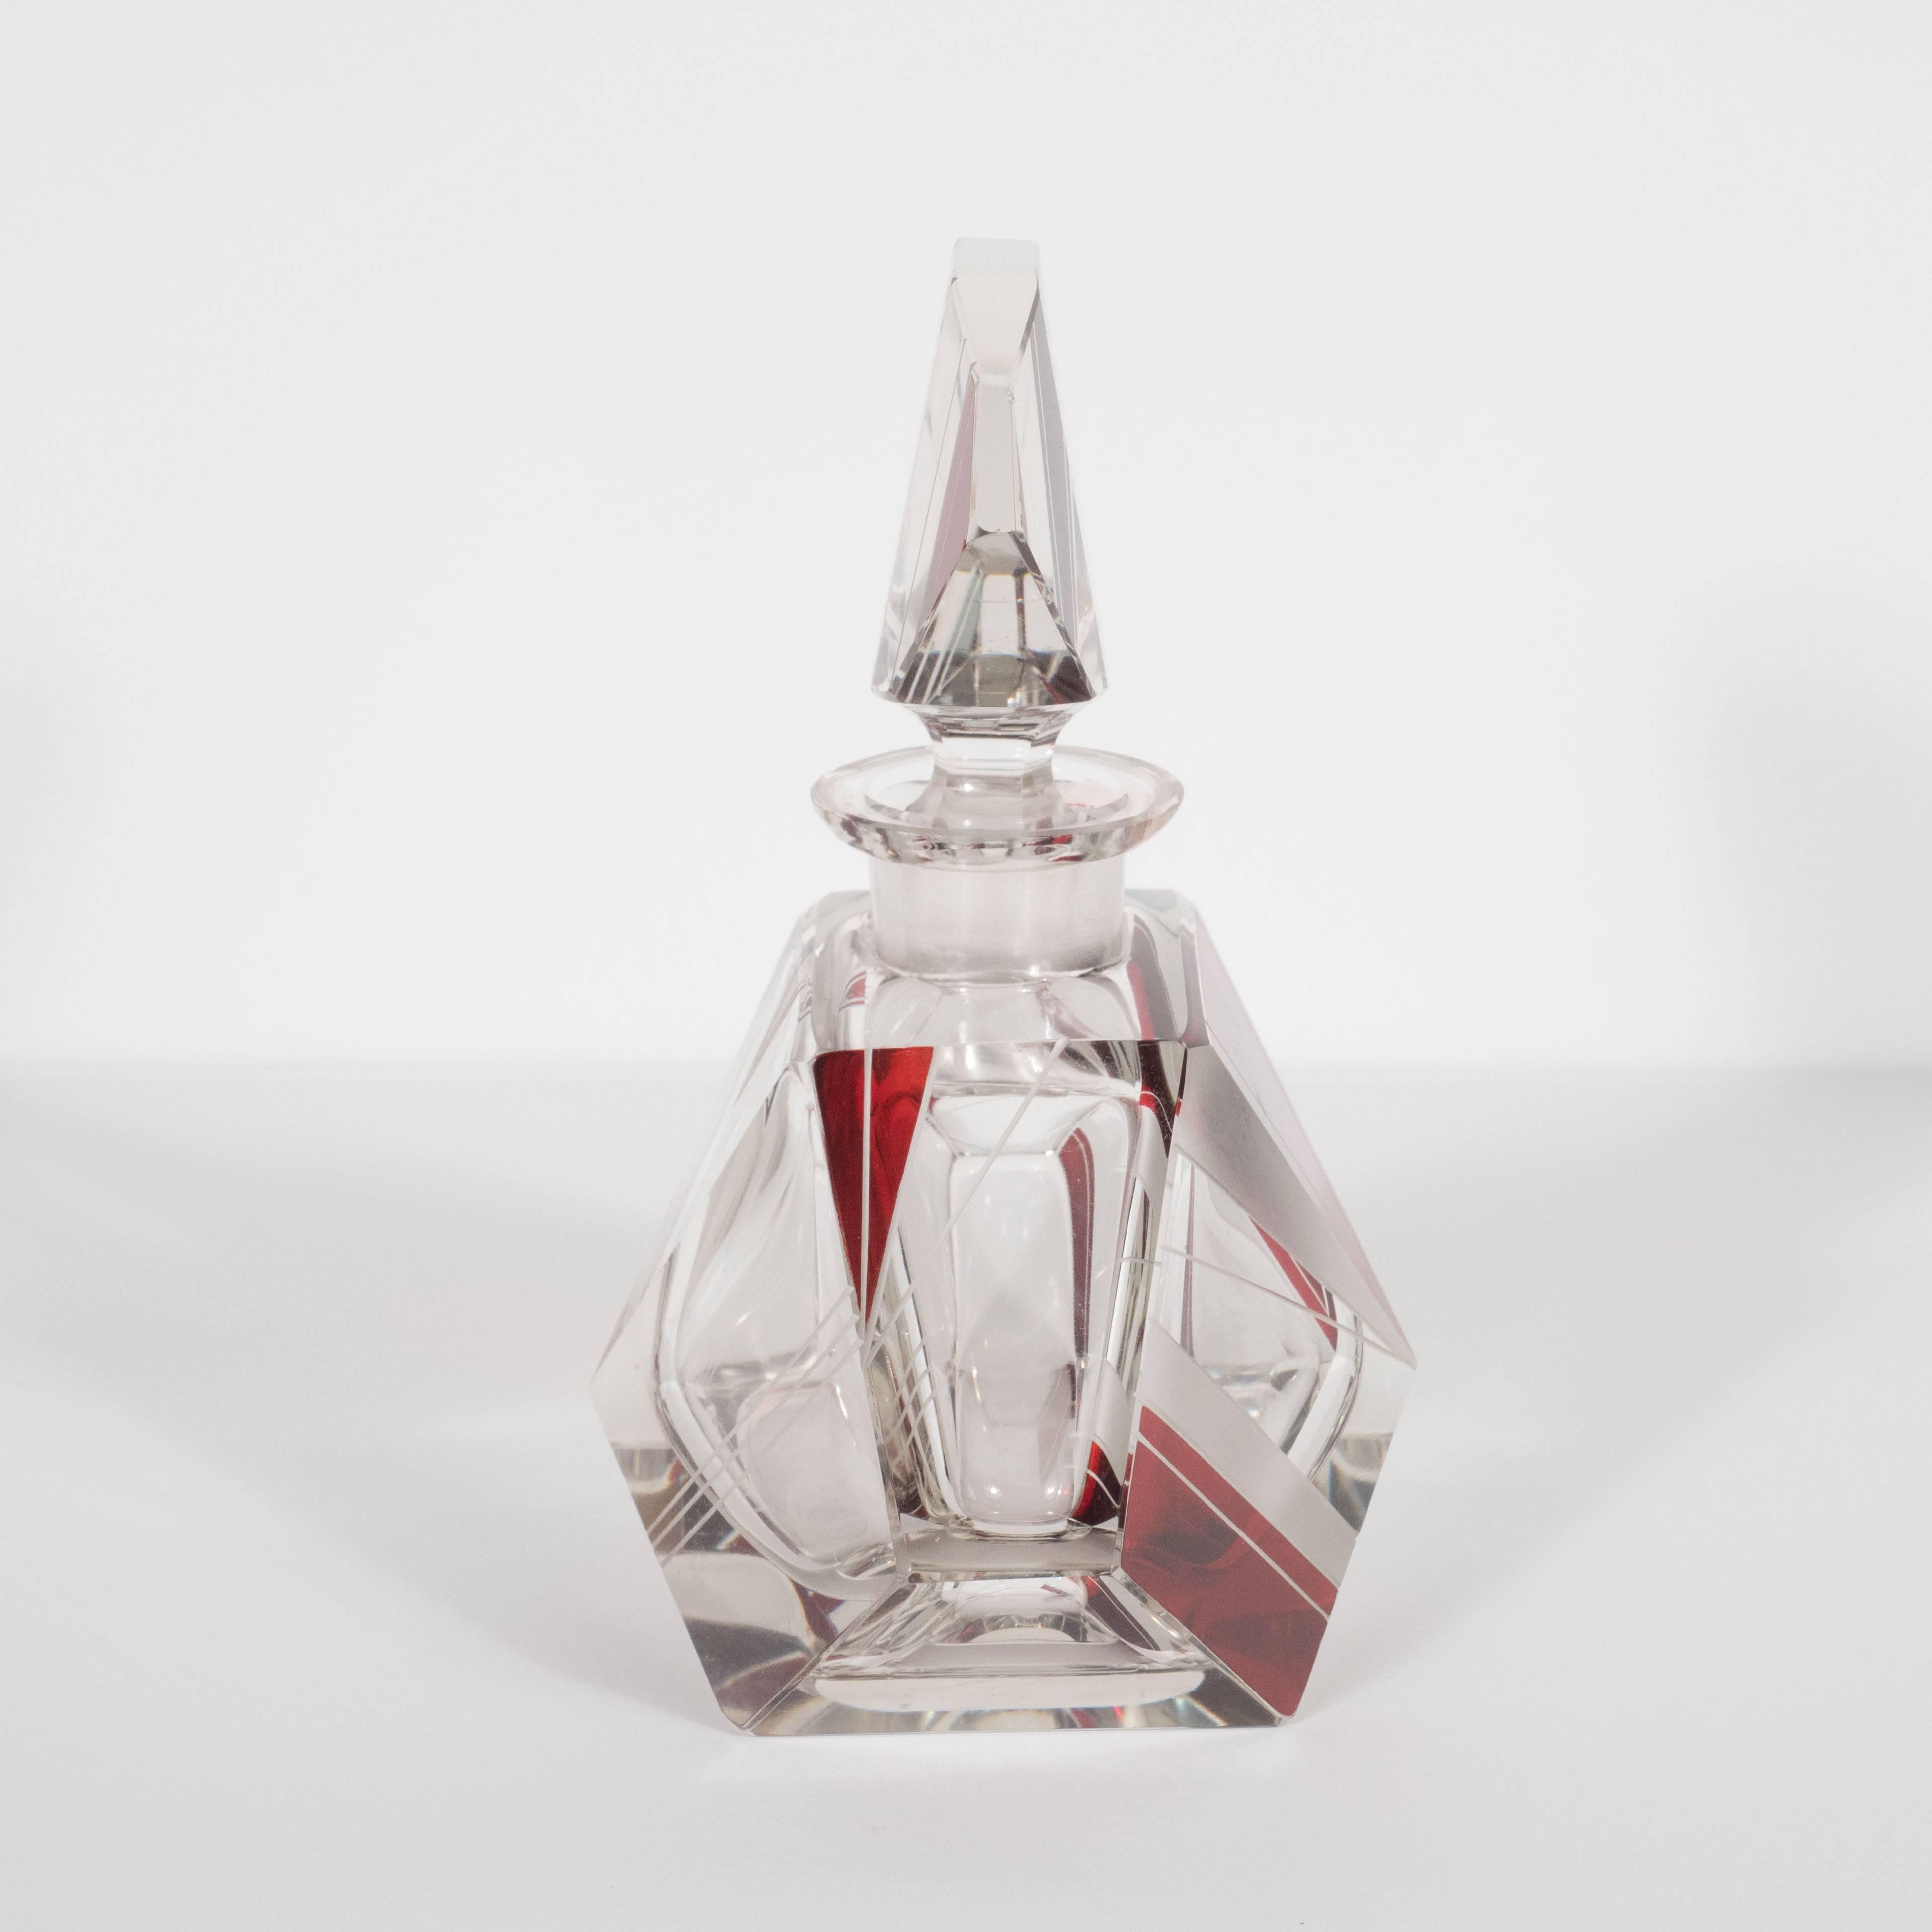 Mid-20th Century Czech Art Deco Perfume Bottle in Crimson and Clear Glass with Geometric Designs